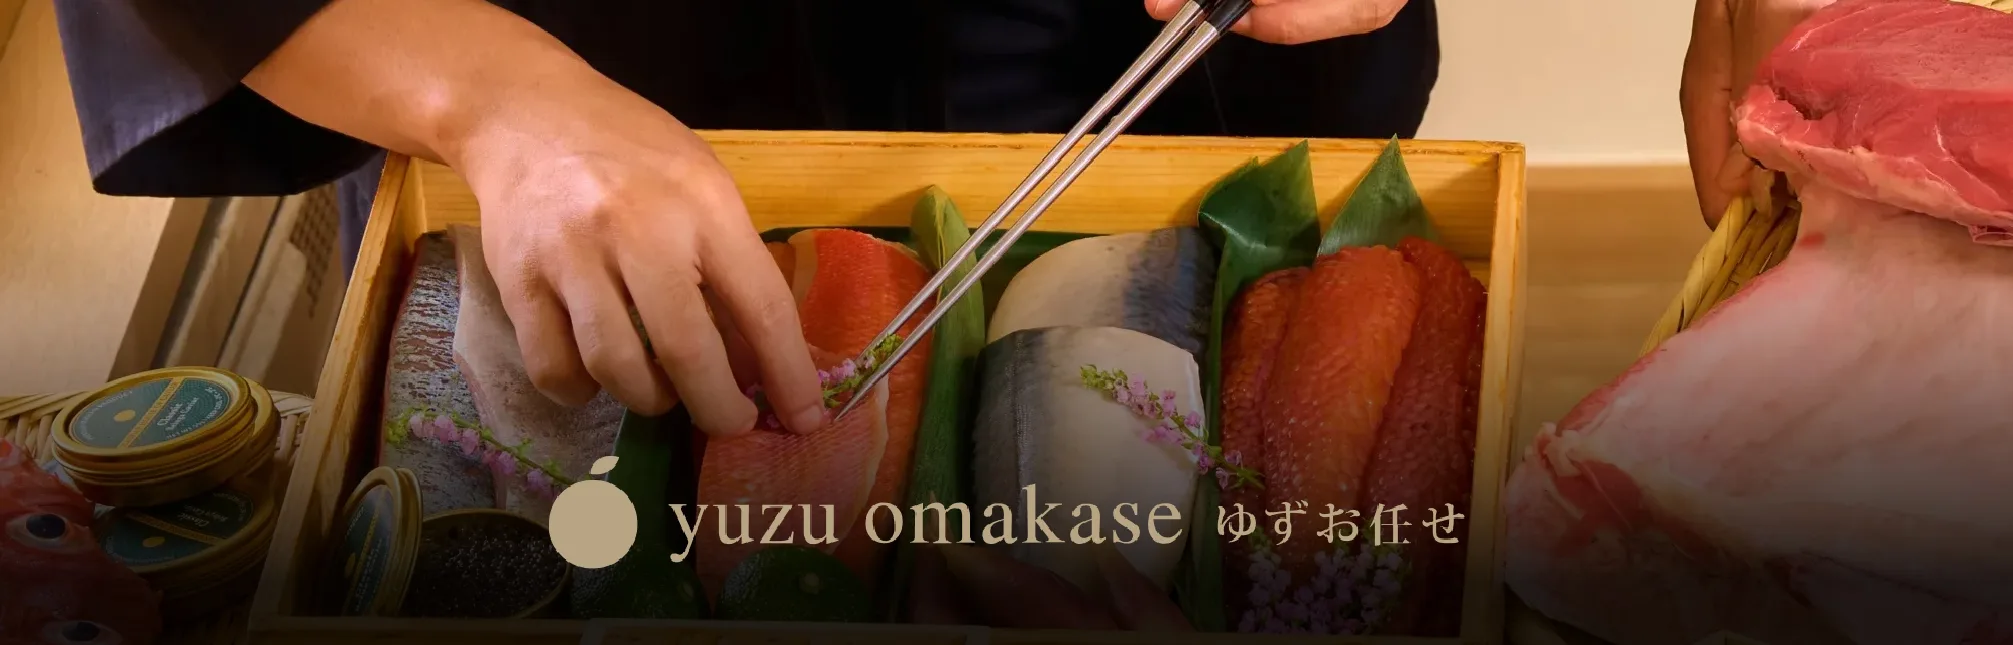 Omakase Experience